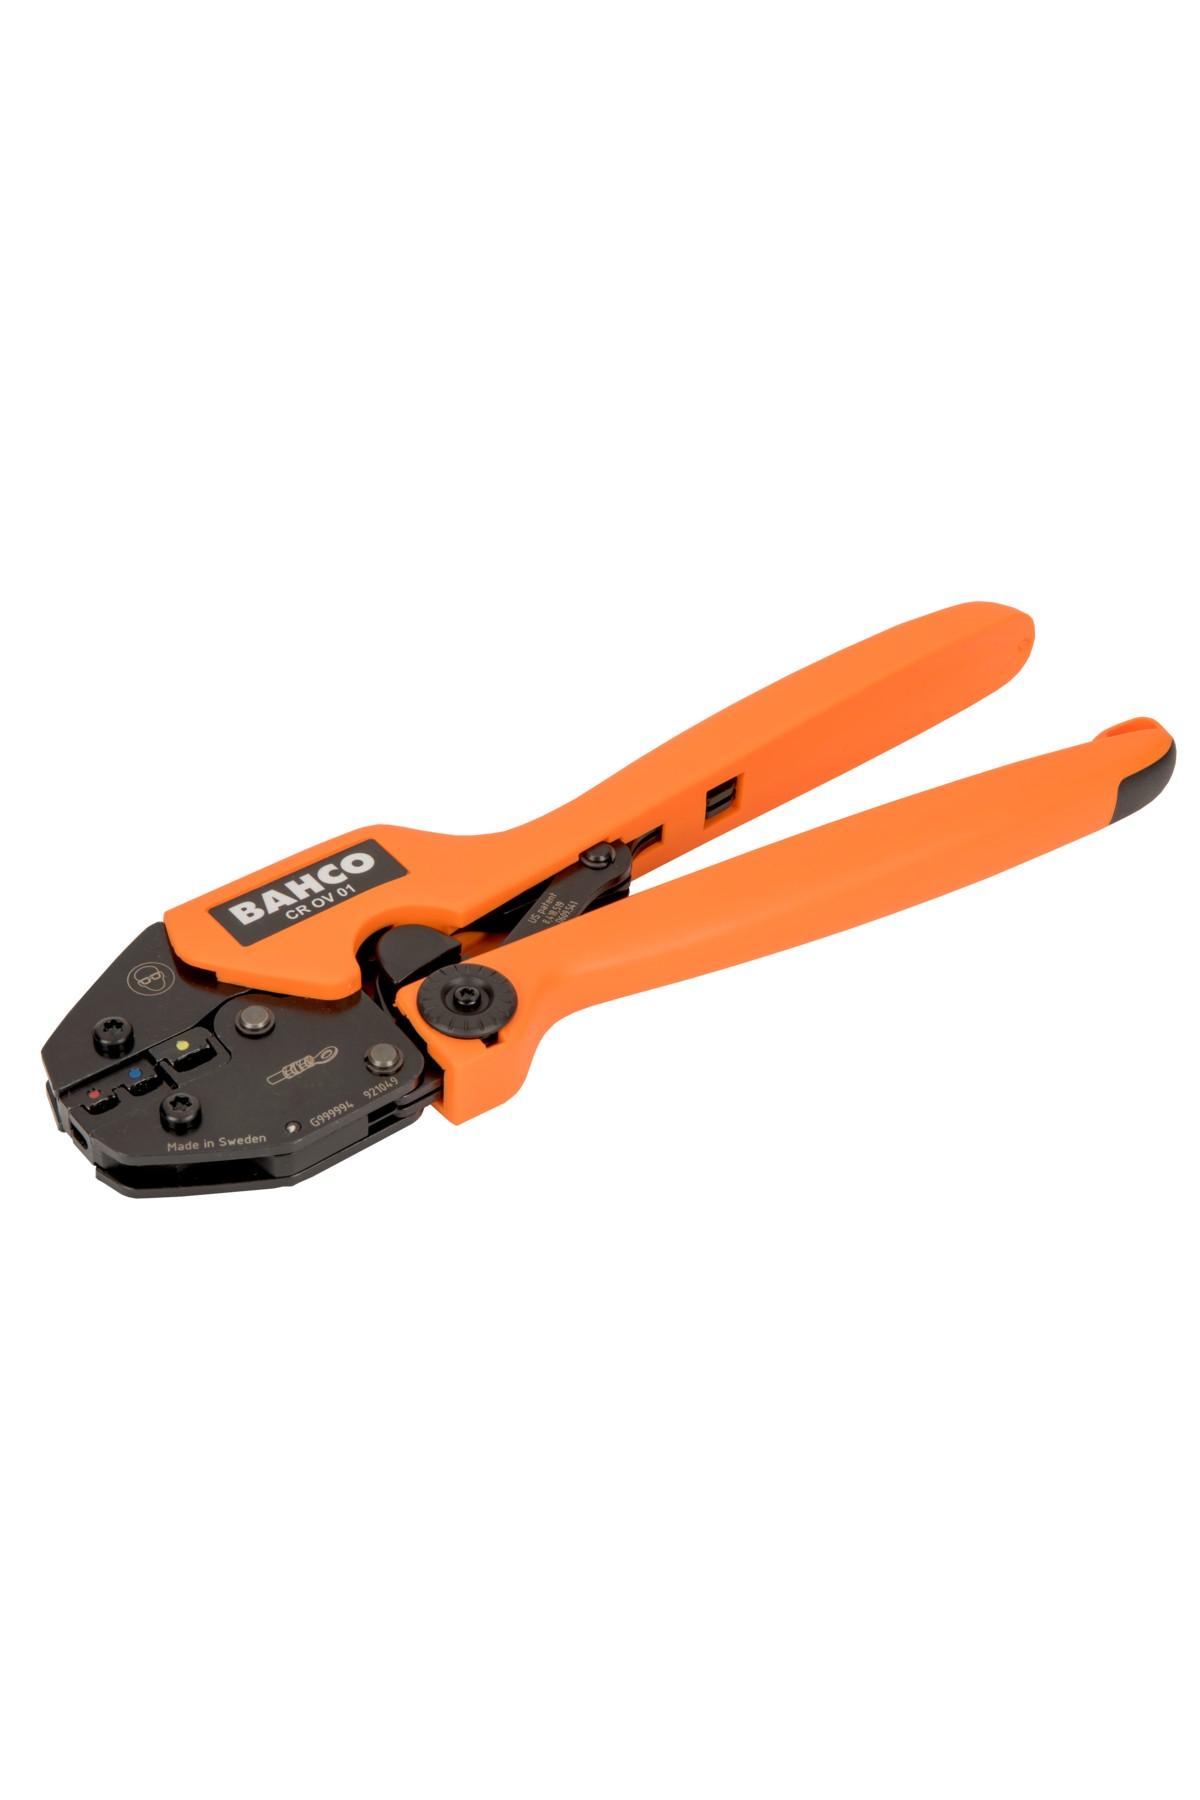 Crimping pliers with ratchet function for insulated connectors - Oval profile